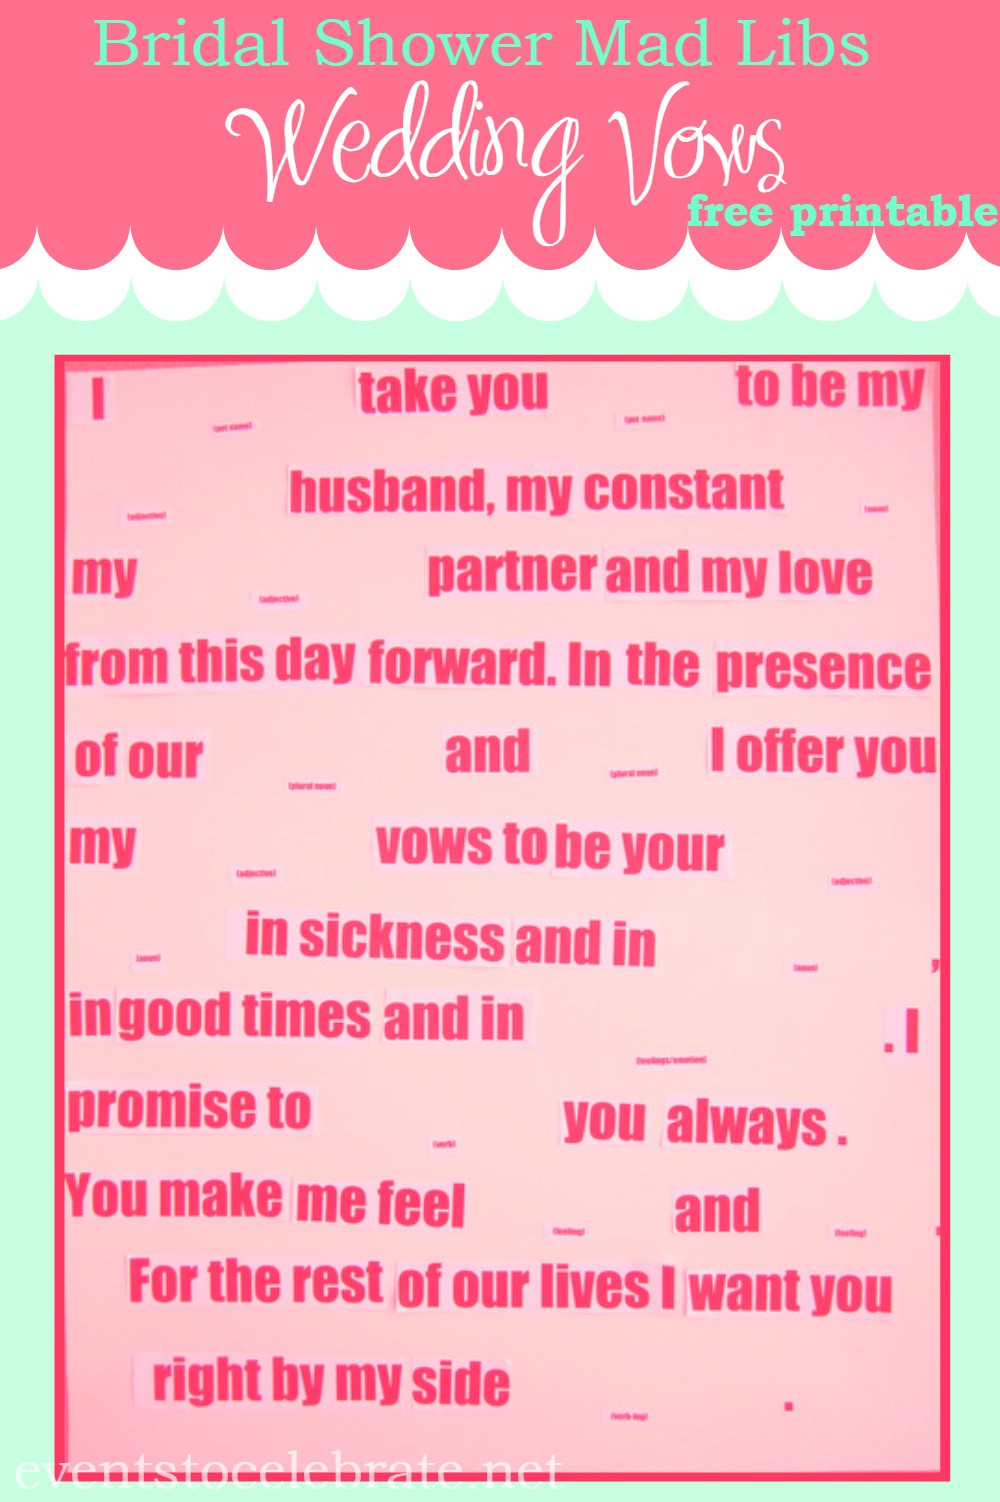 Weddings Vows
 Mad Libs Wedding Vows events to CELEBRATE